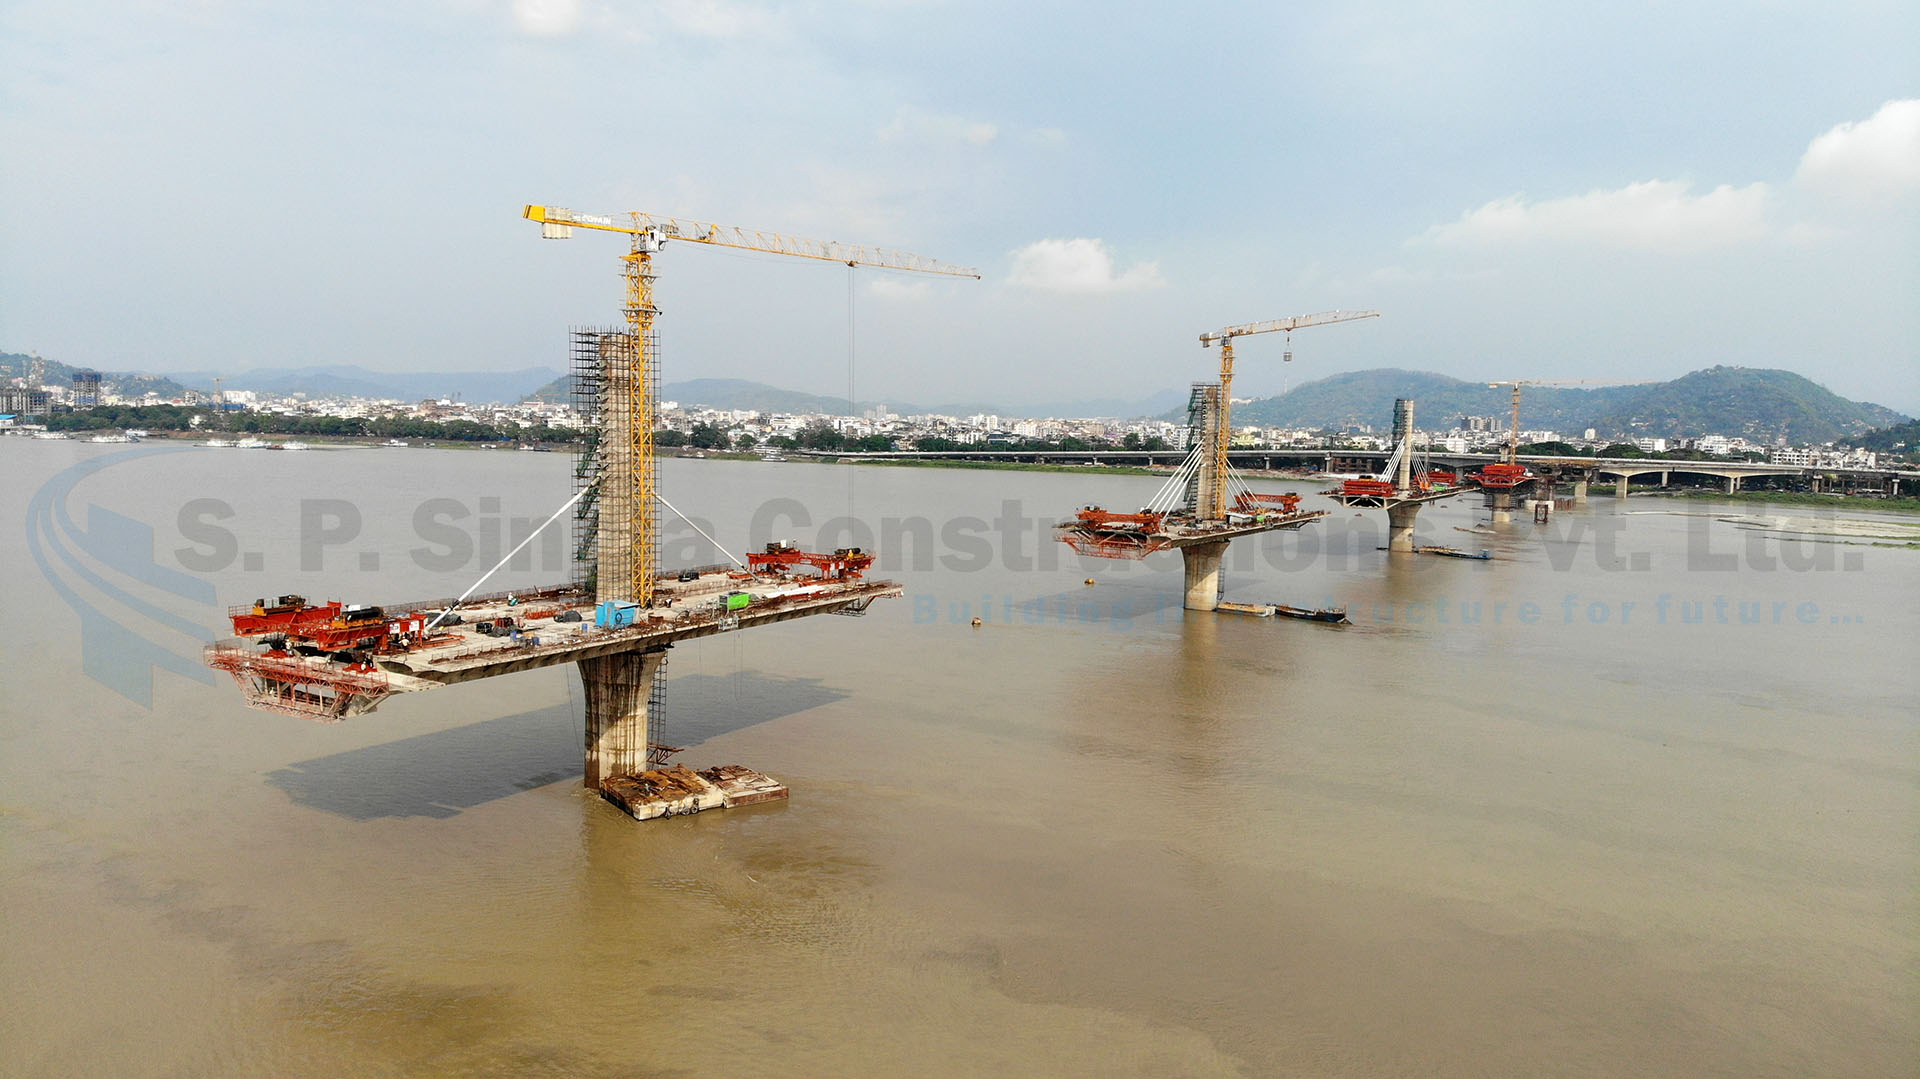 Extradosed PSC Bridge across river Brahmputra connecting Guwahati and North Guwahati in Assam